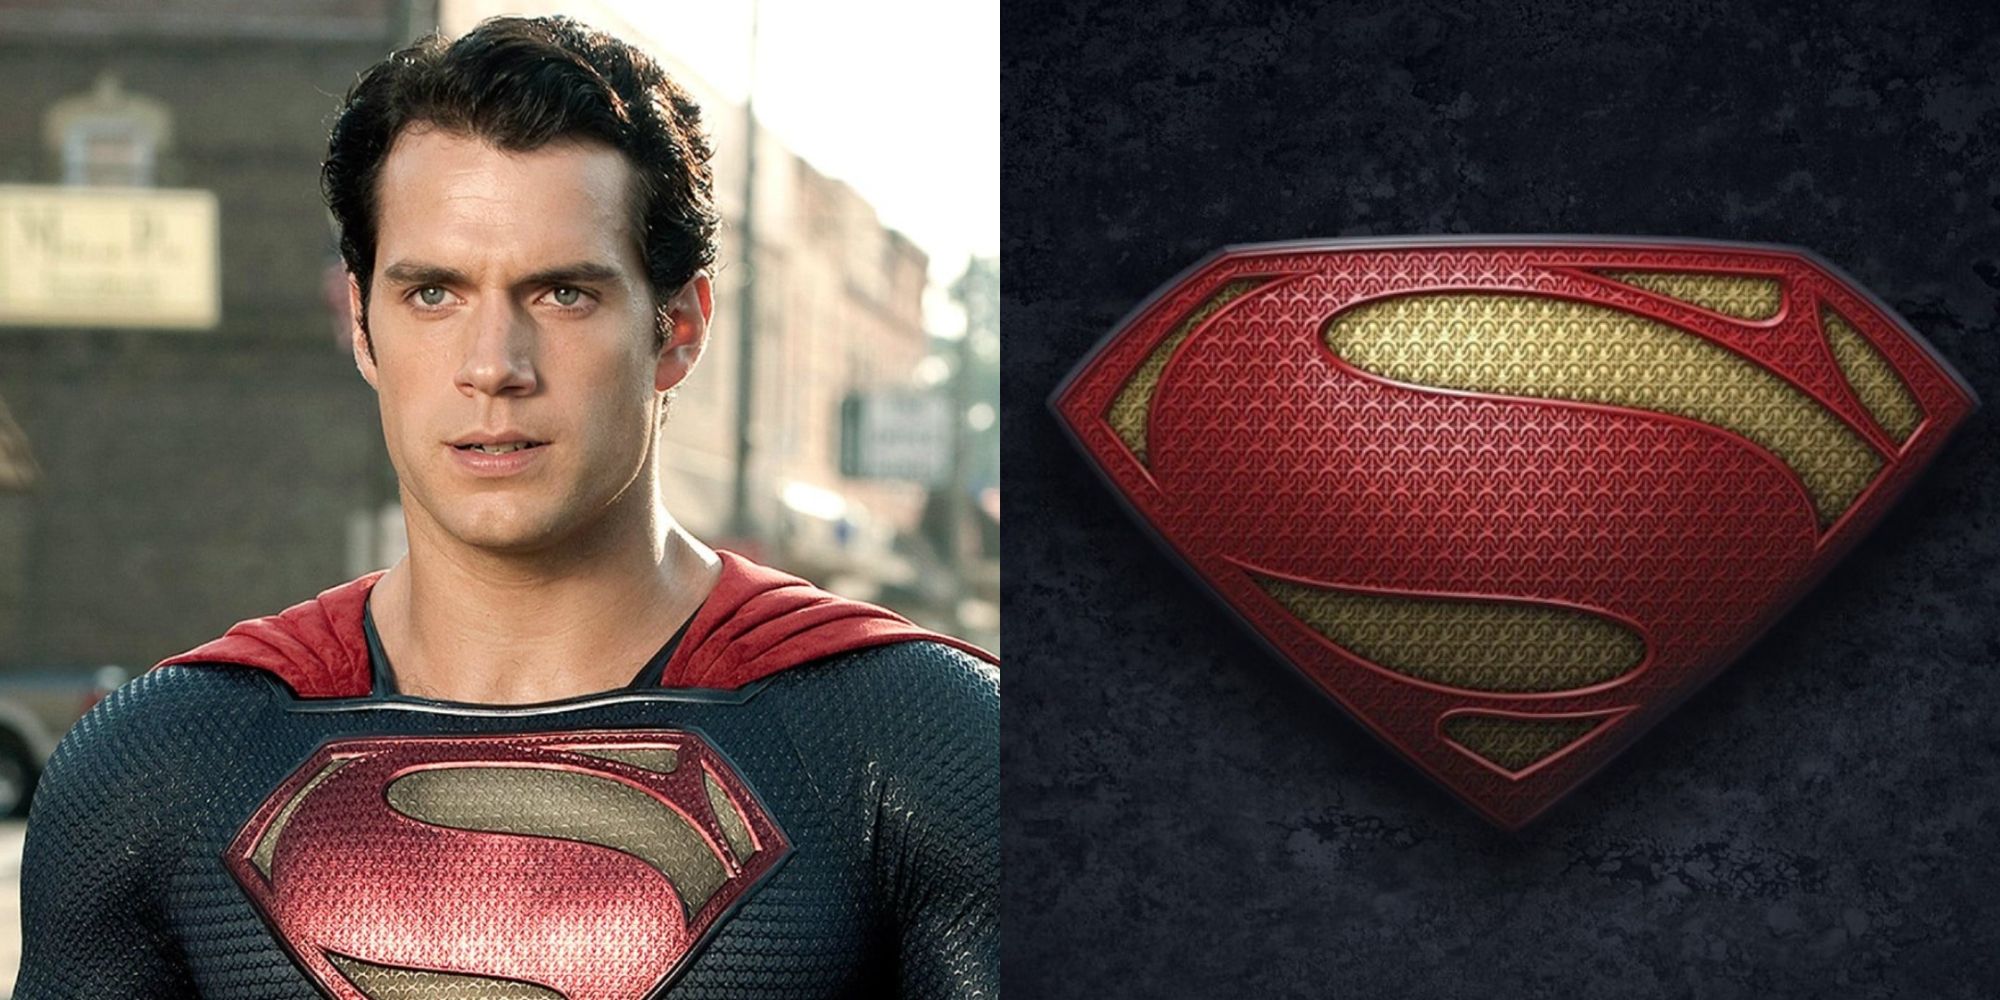 A split image of Superman and the Man of Steel logo